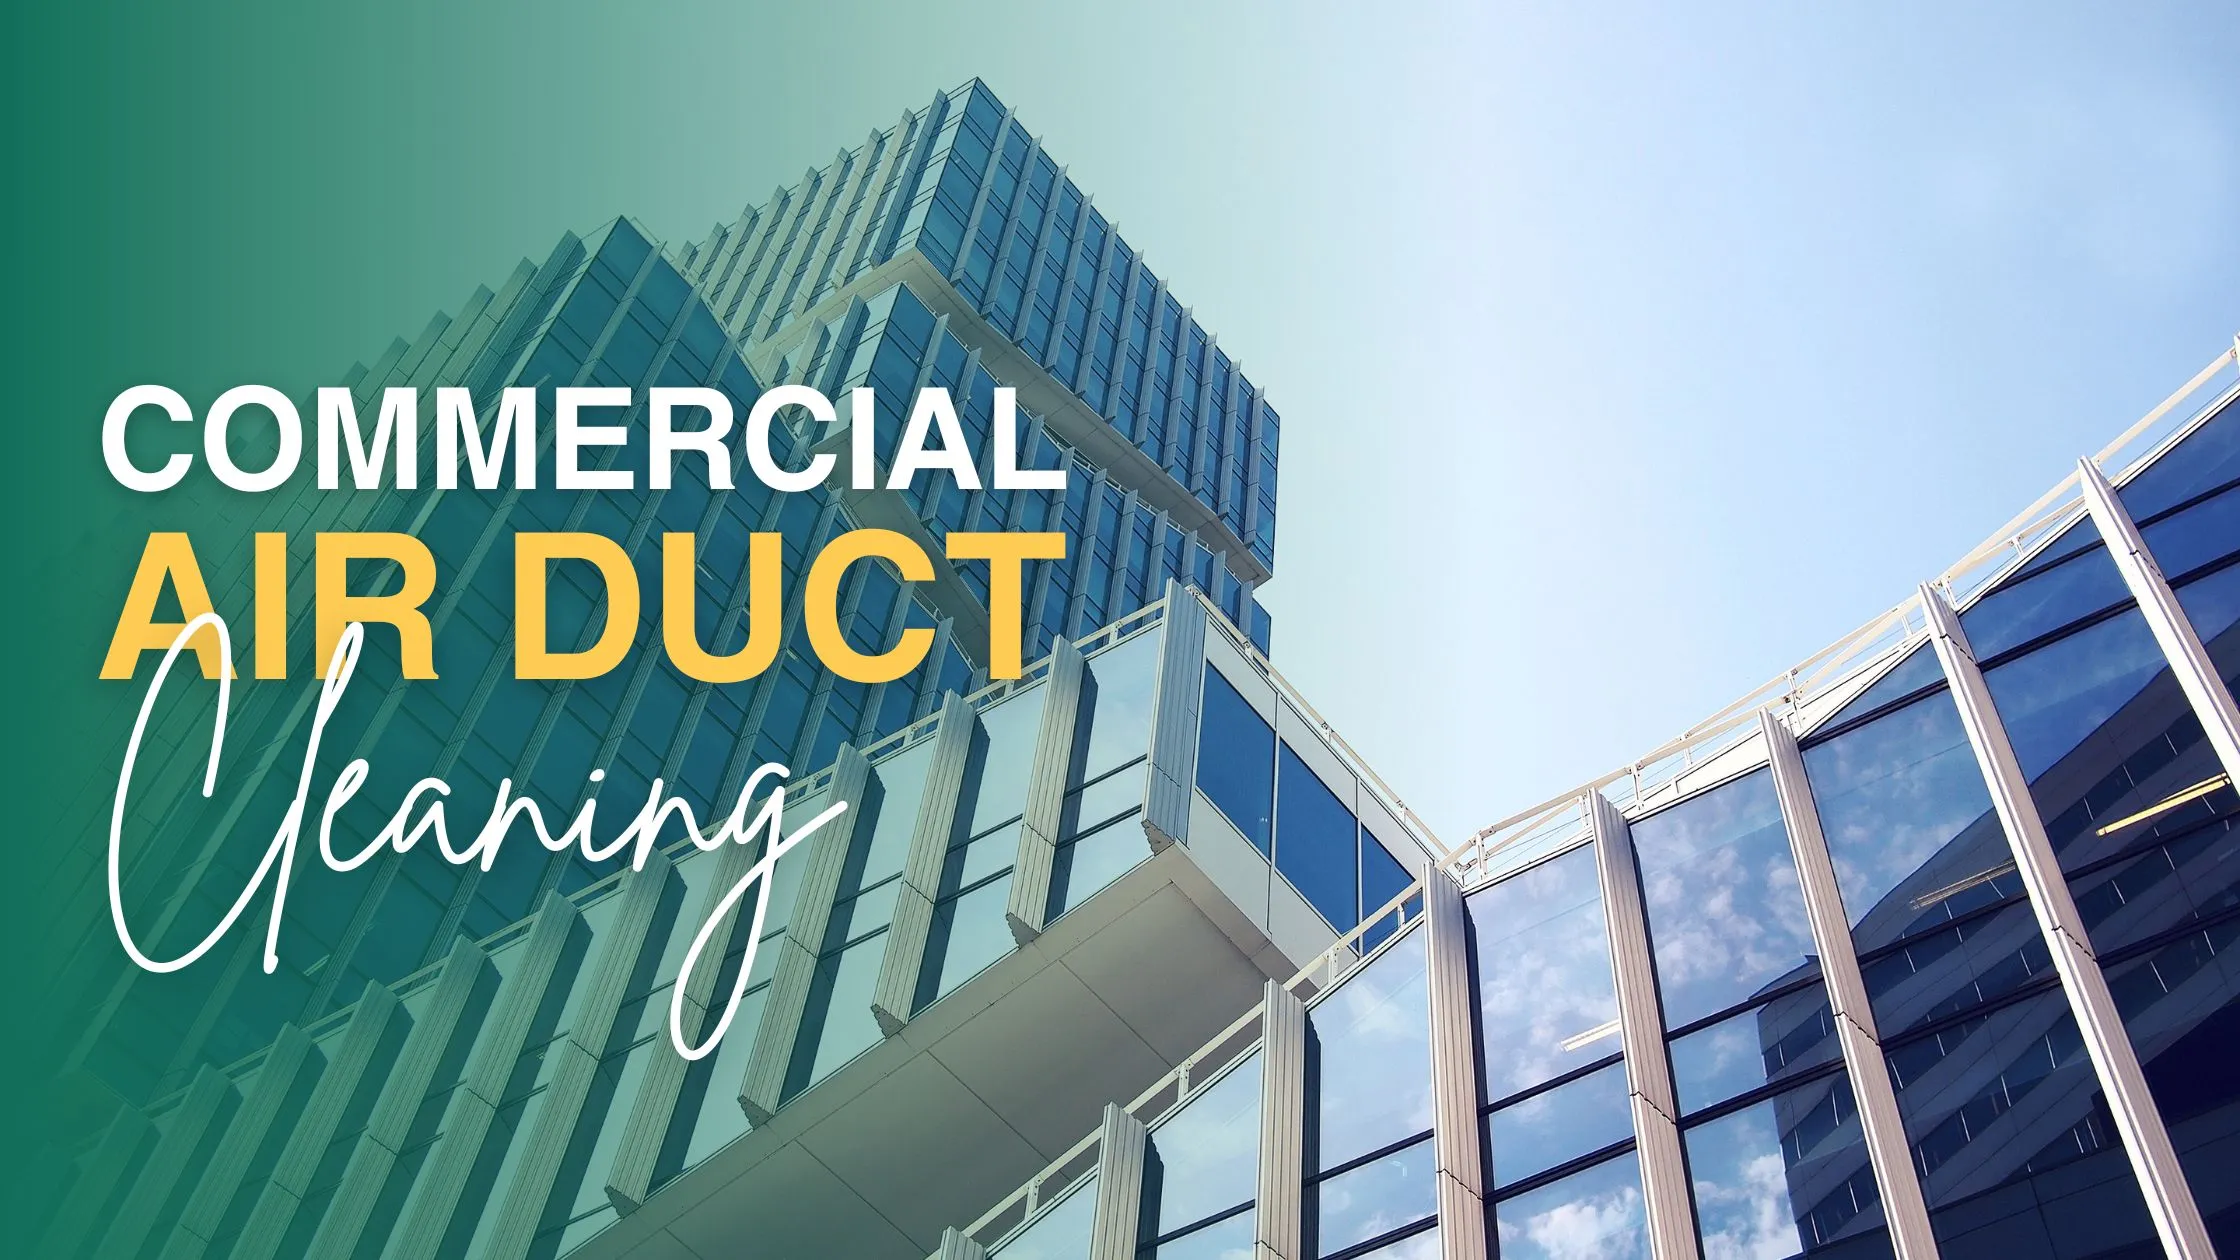 Top-Rated Commercial Air Duct Cleaning Services | Free Estimate